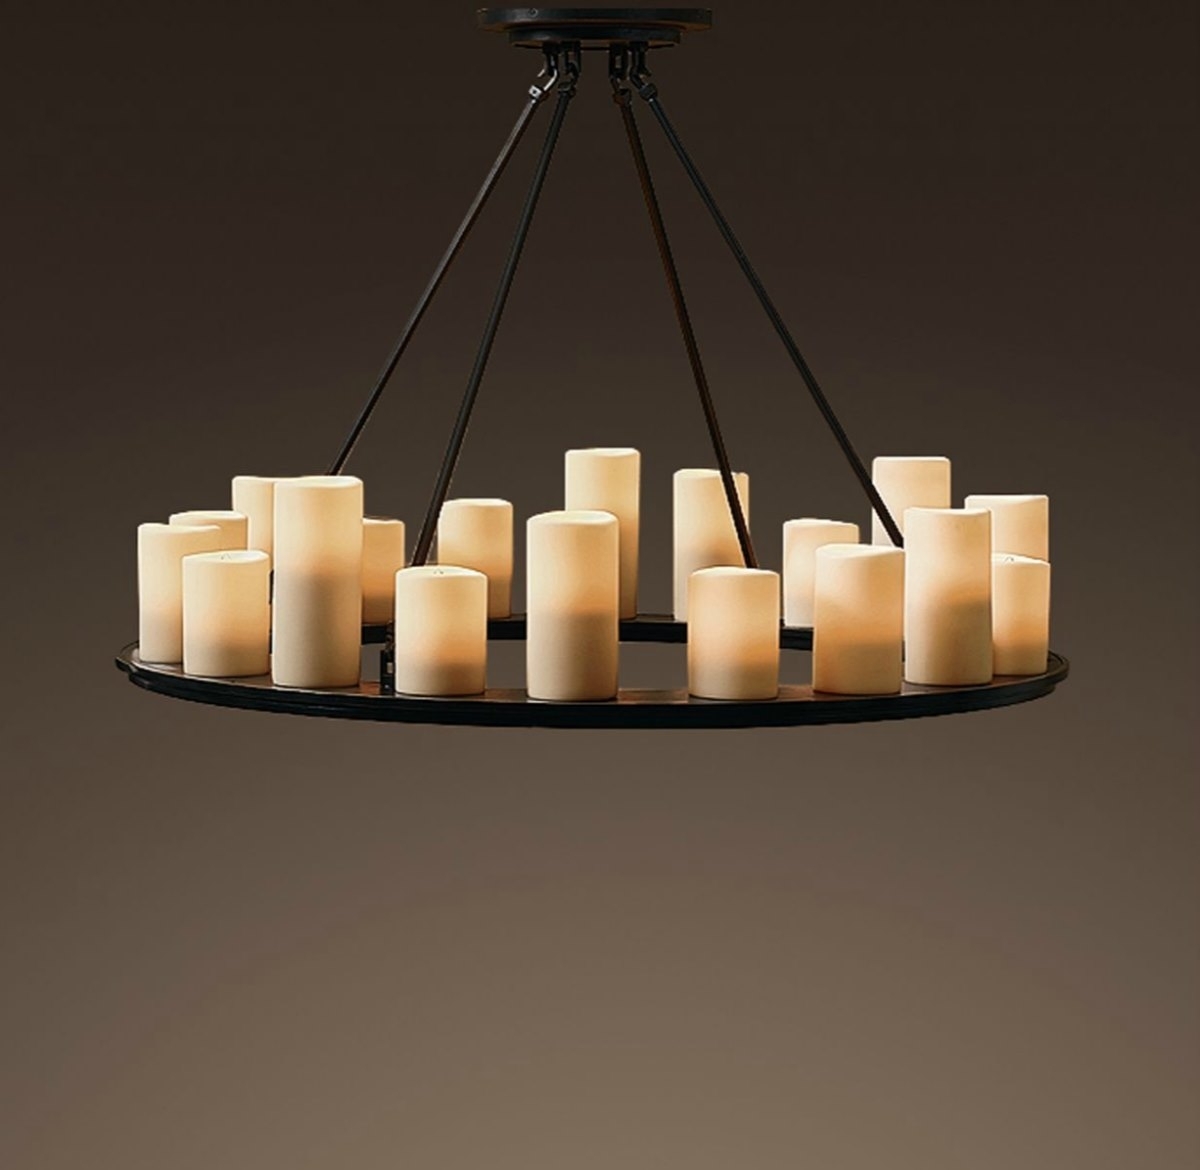 Candle Style Chandelier - Charlton Home Kenedy 9 Light Candle Style ...